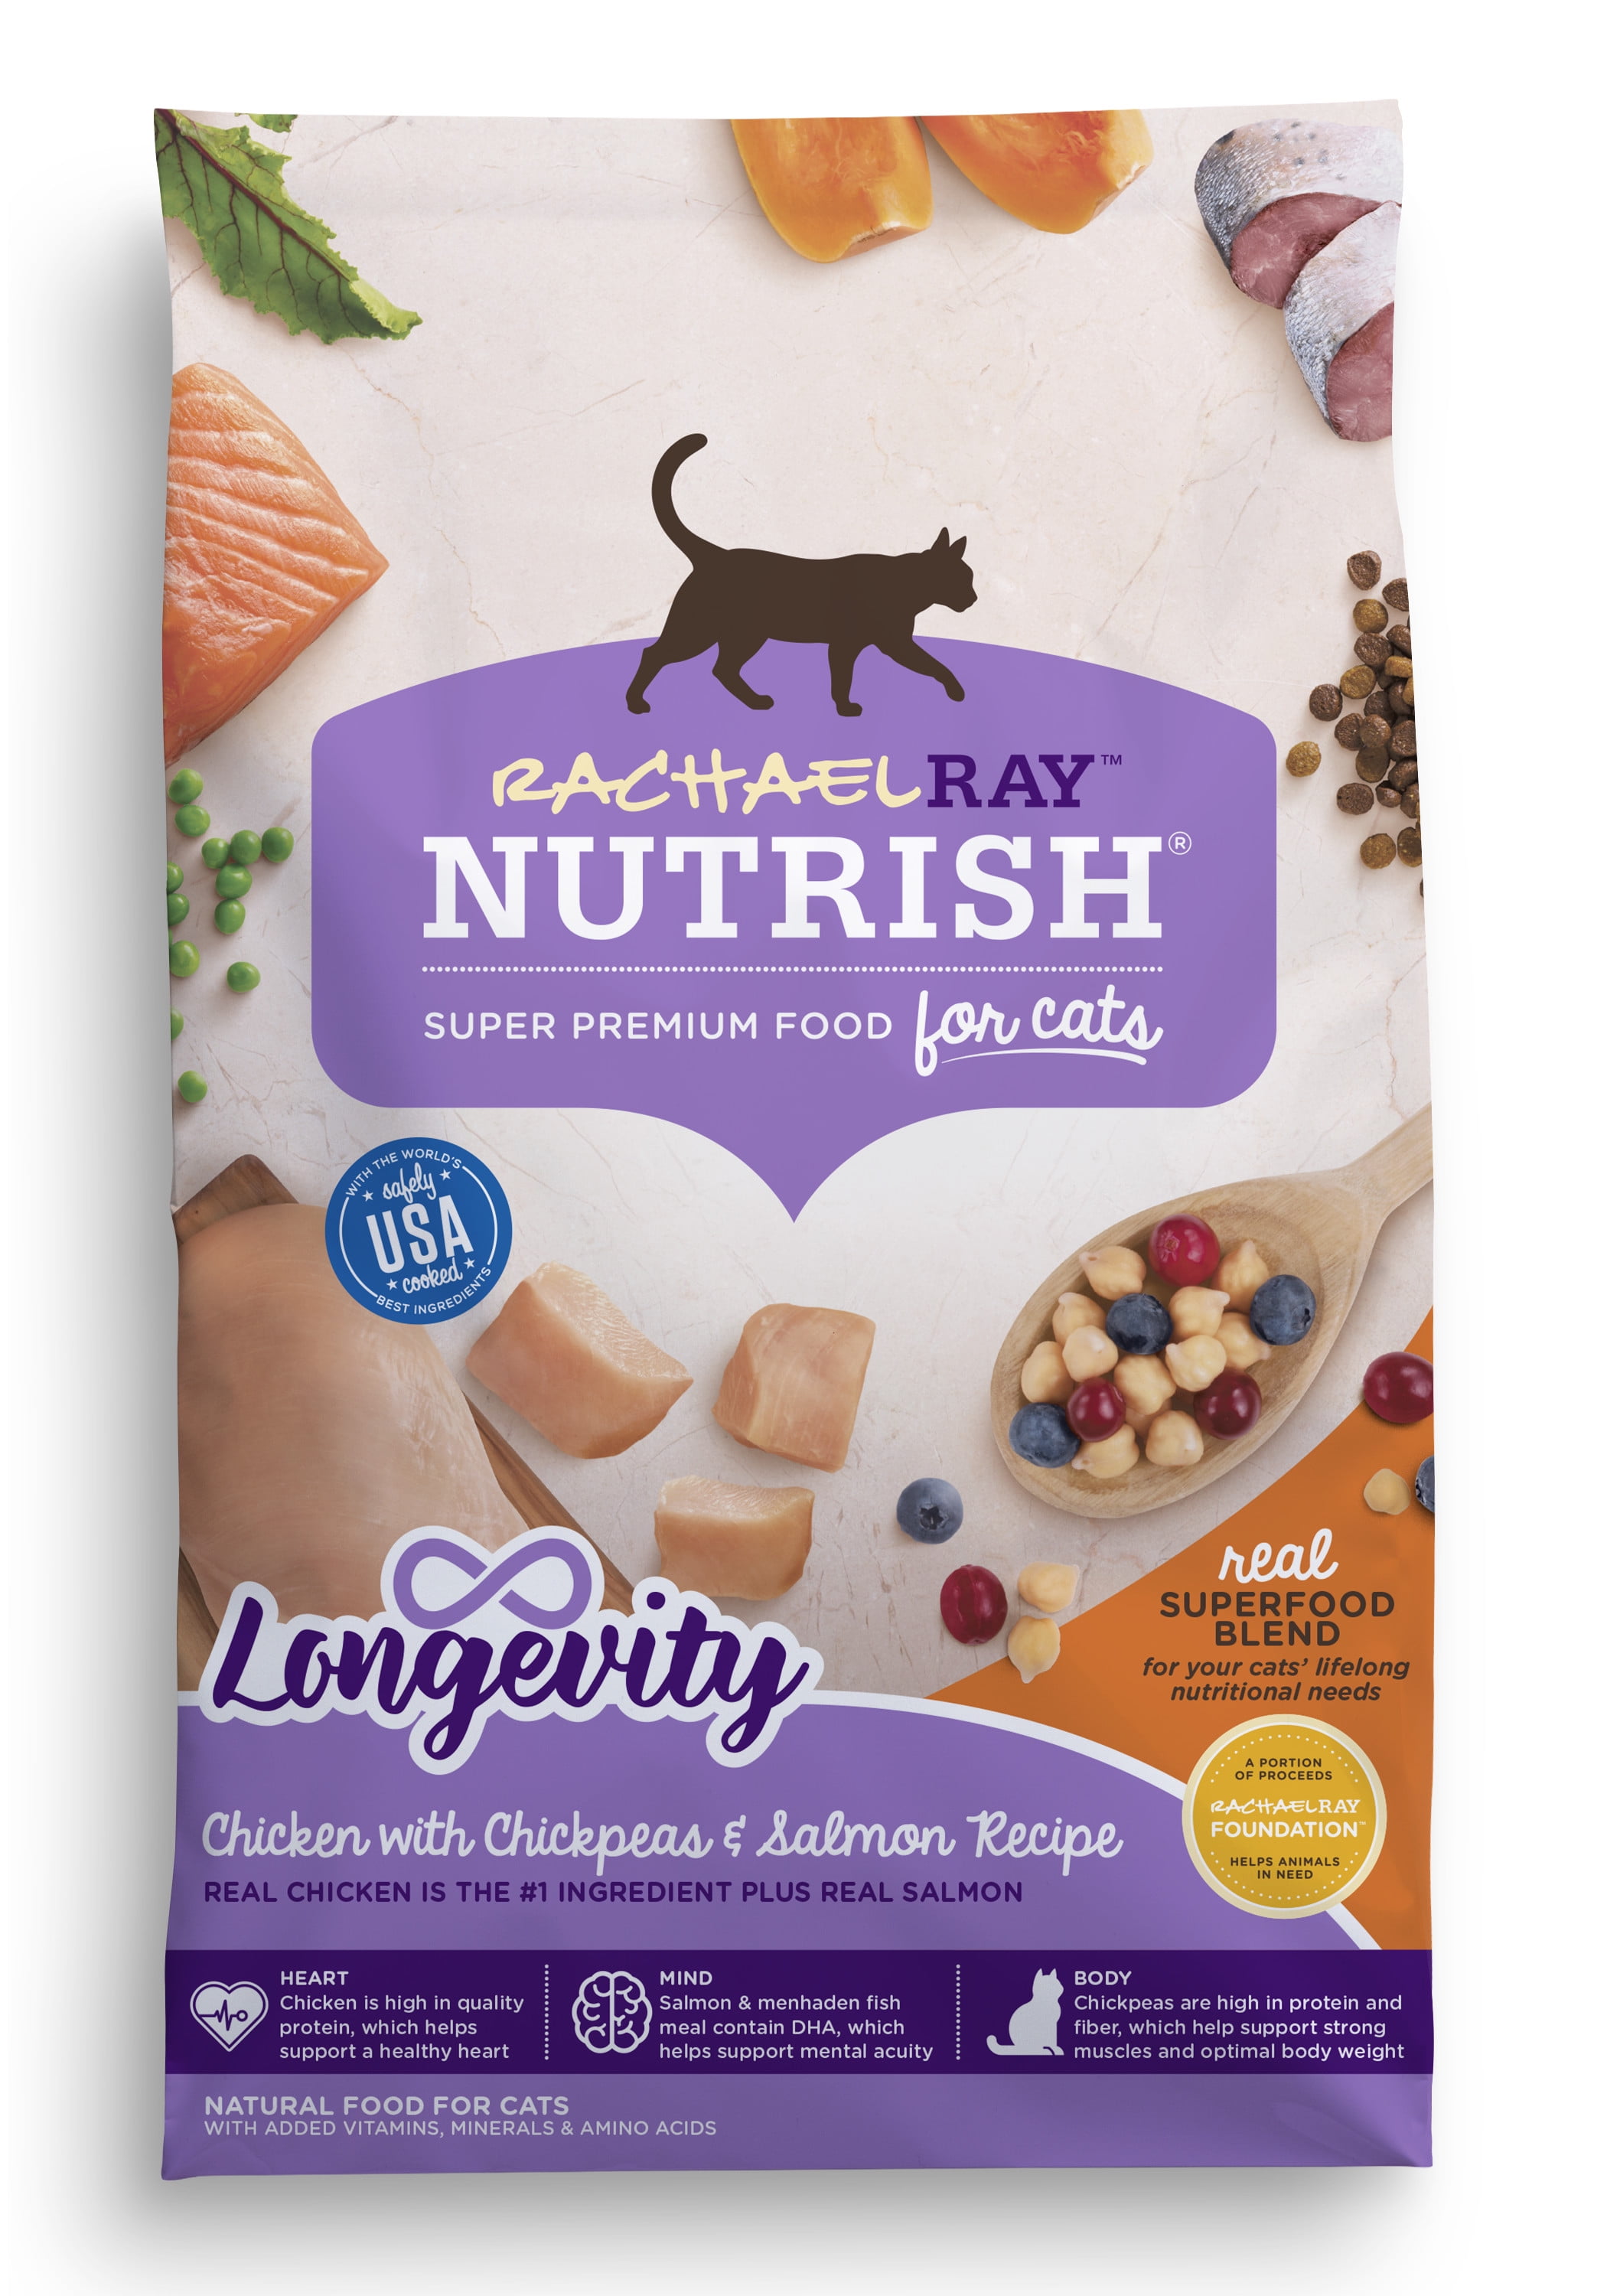 Photo 1 of Rachael Ray Nutrish Longevity Natural Chicken with Chickpeas & Salmon Recipe Dry Cat Food - 3lb
EXP 10/04/2021